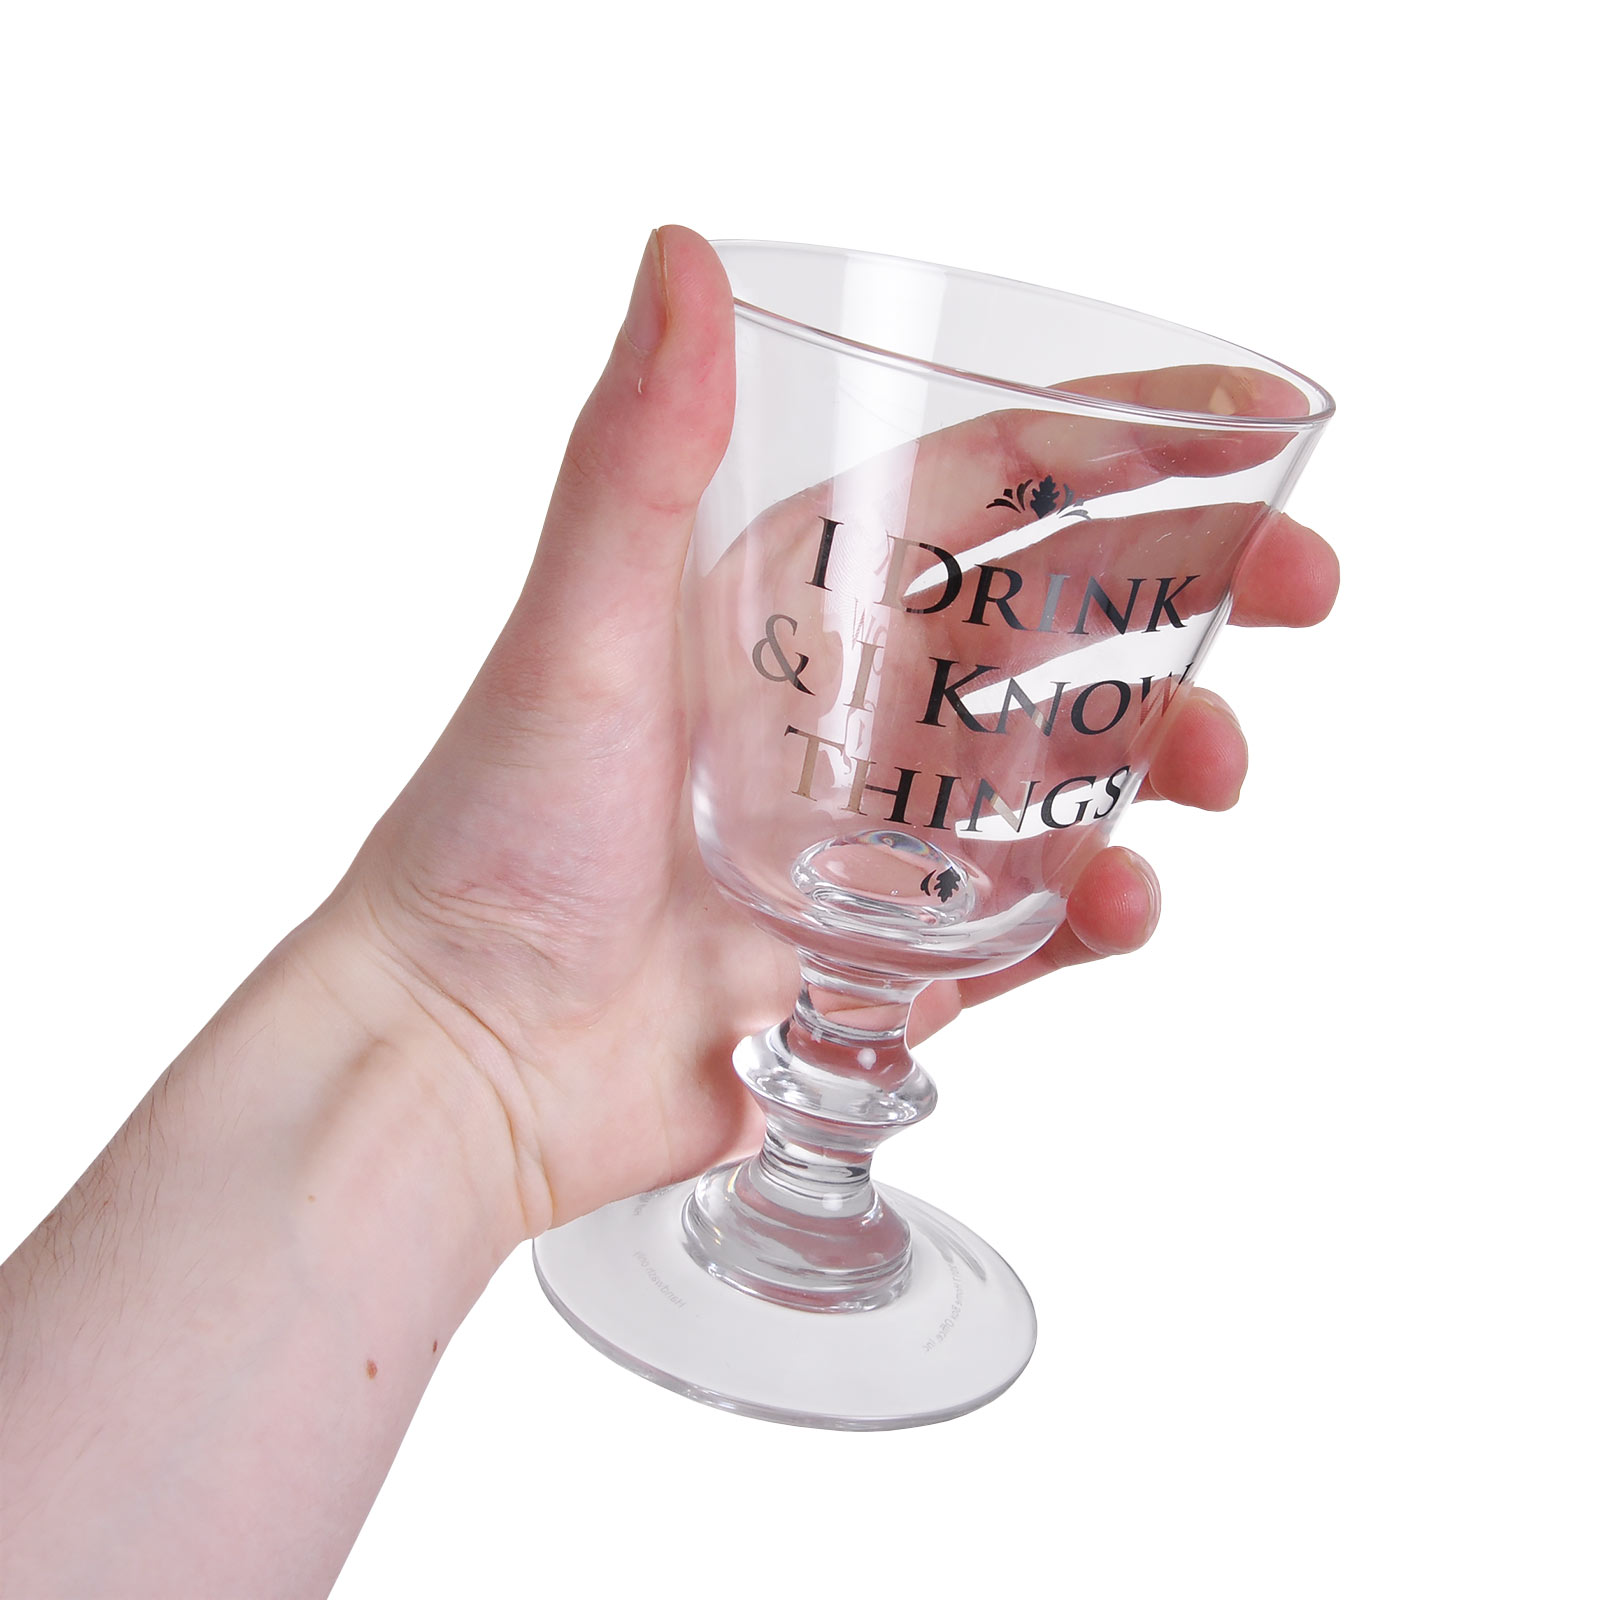 Game of Thrones - Drink and Know wine glass